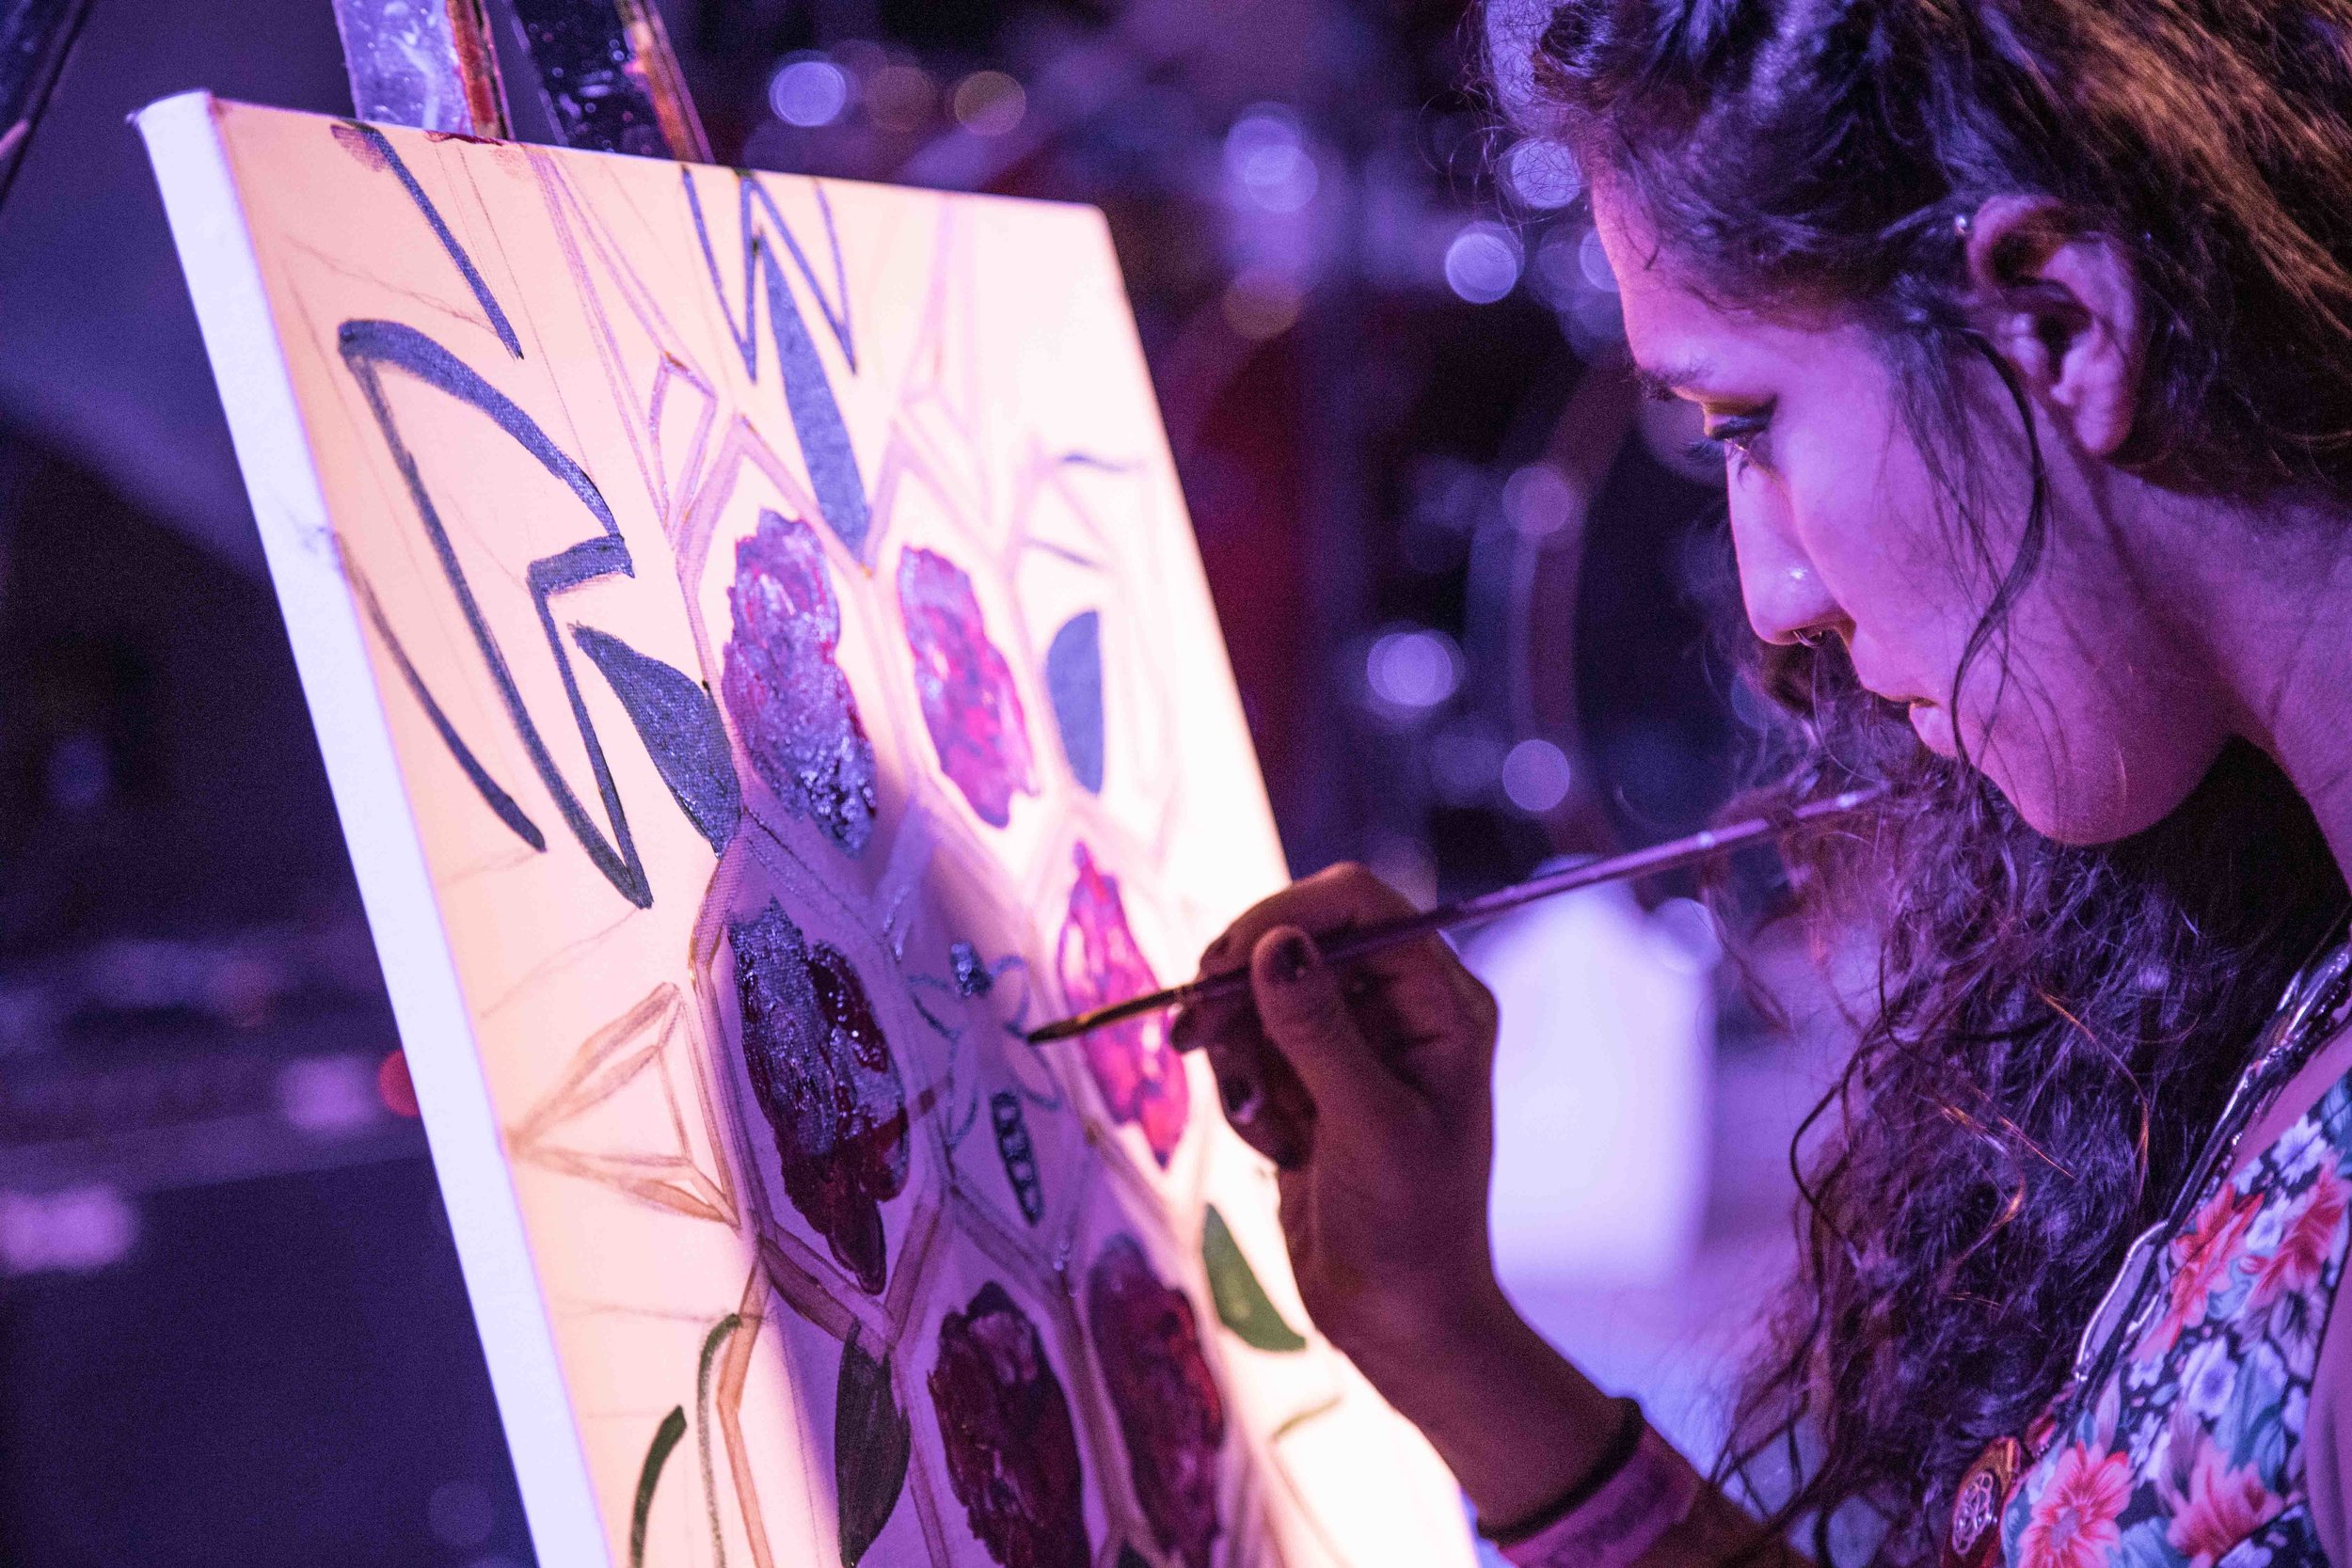  Local Artist paints to live music on stage at the Buttermilk Jamboree event 